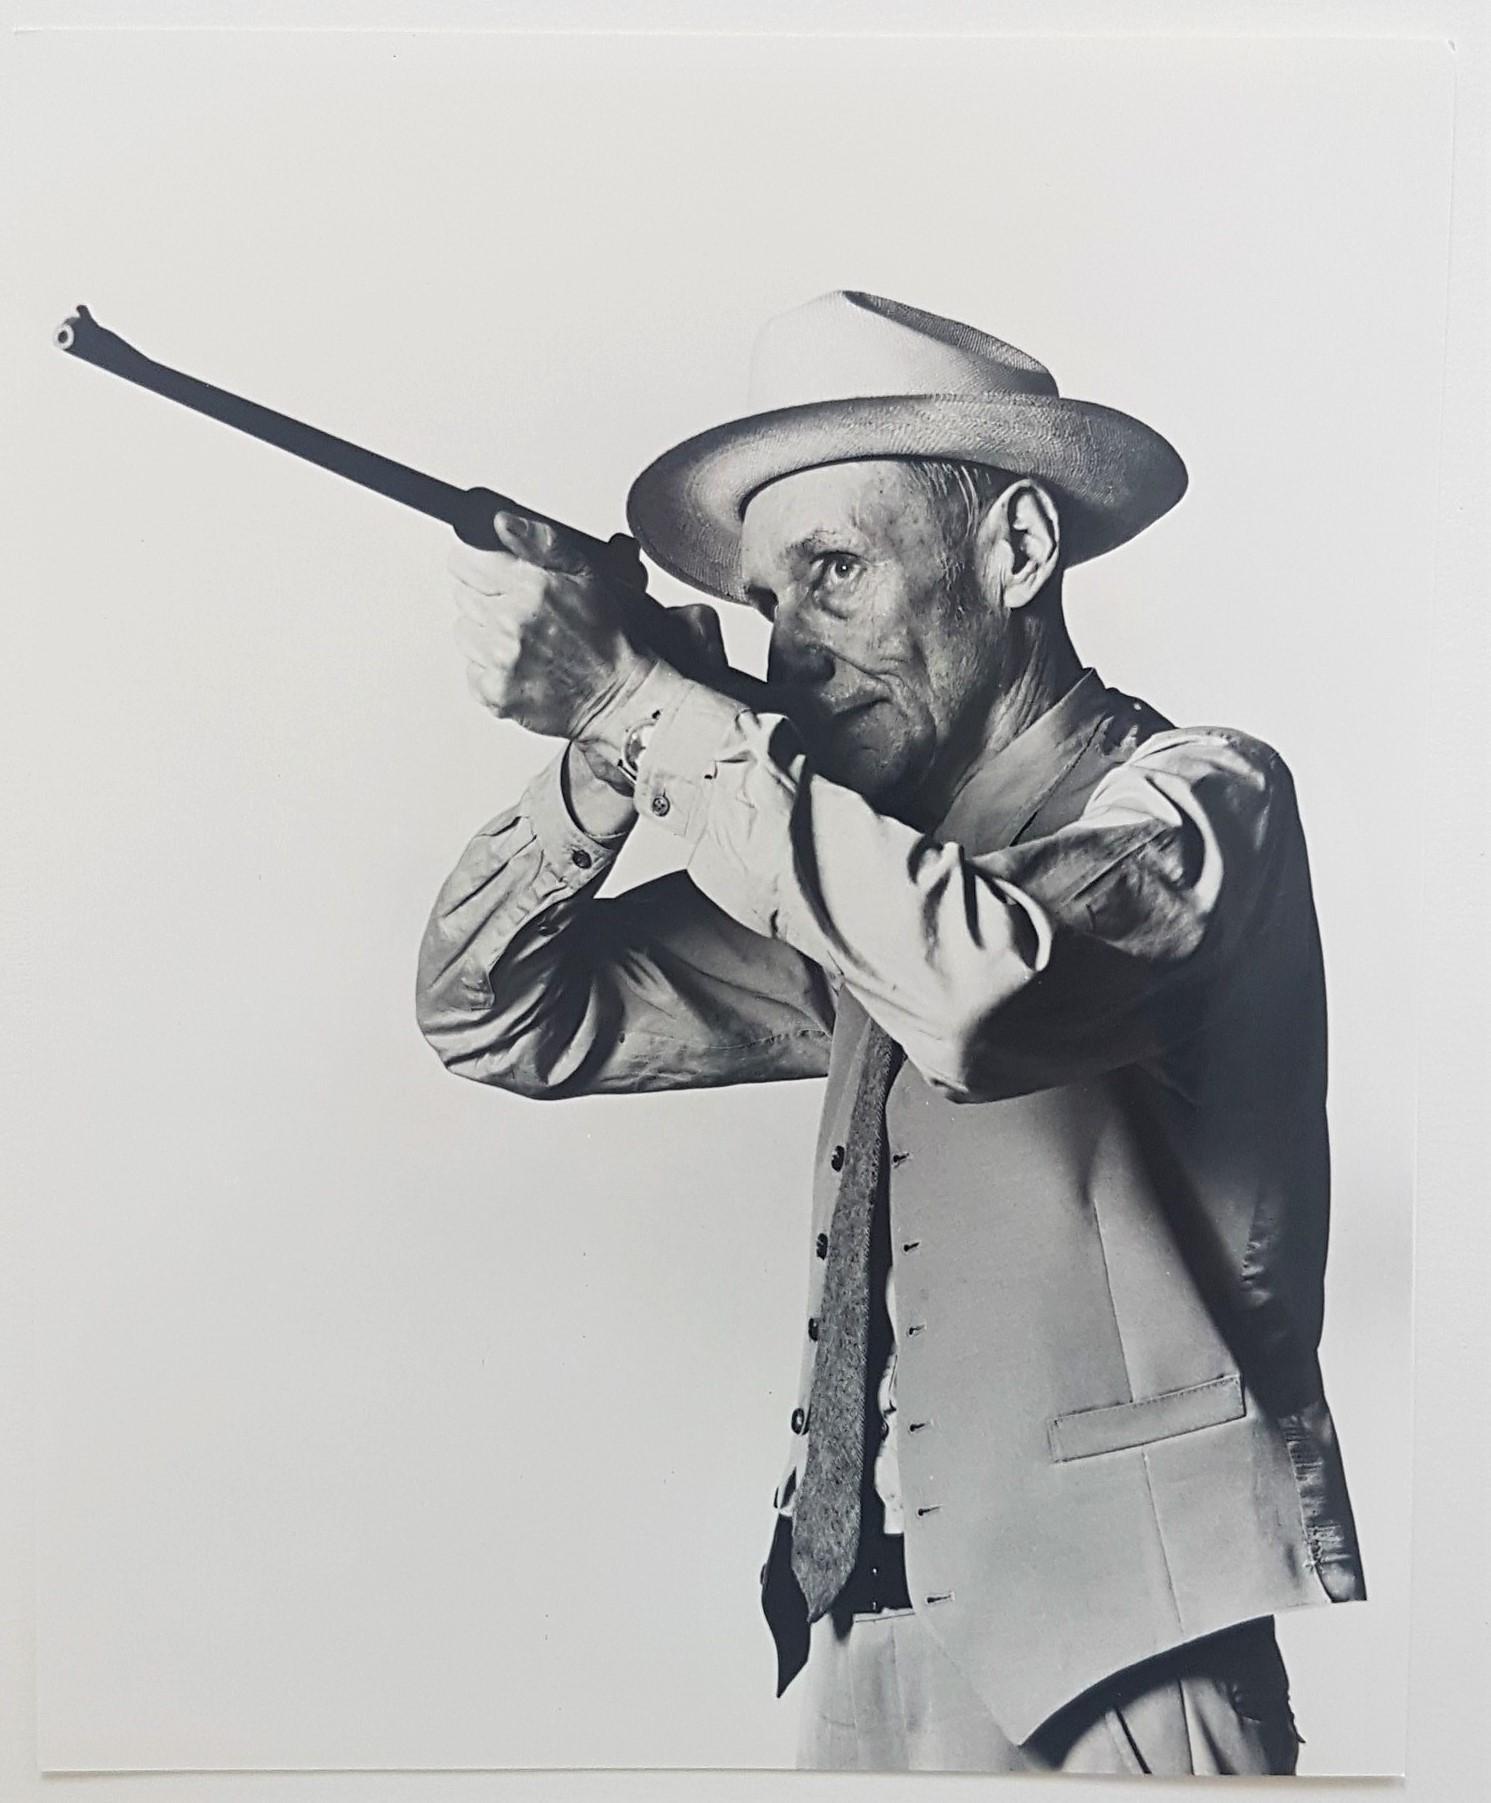 Robert Mapplethorpe Figurative Photograph - William S. Burroughs (Stamped) (~30% OFF LIST PRICE, LIMITED TIME)